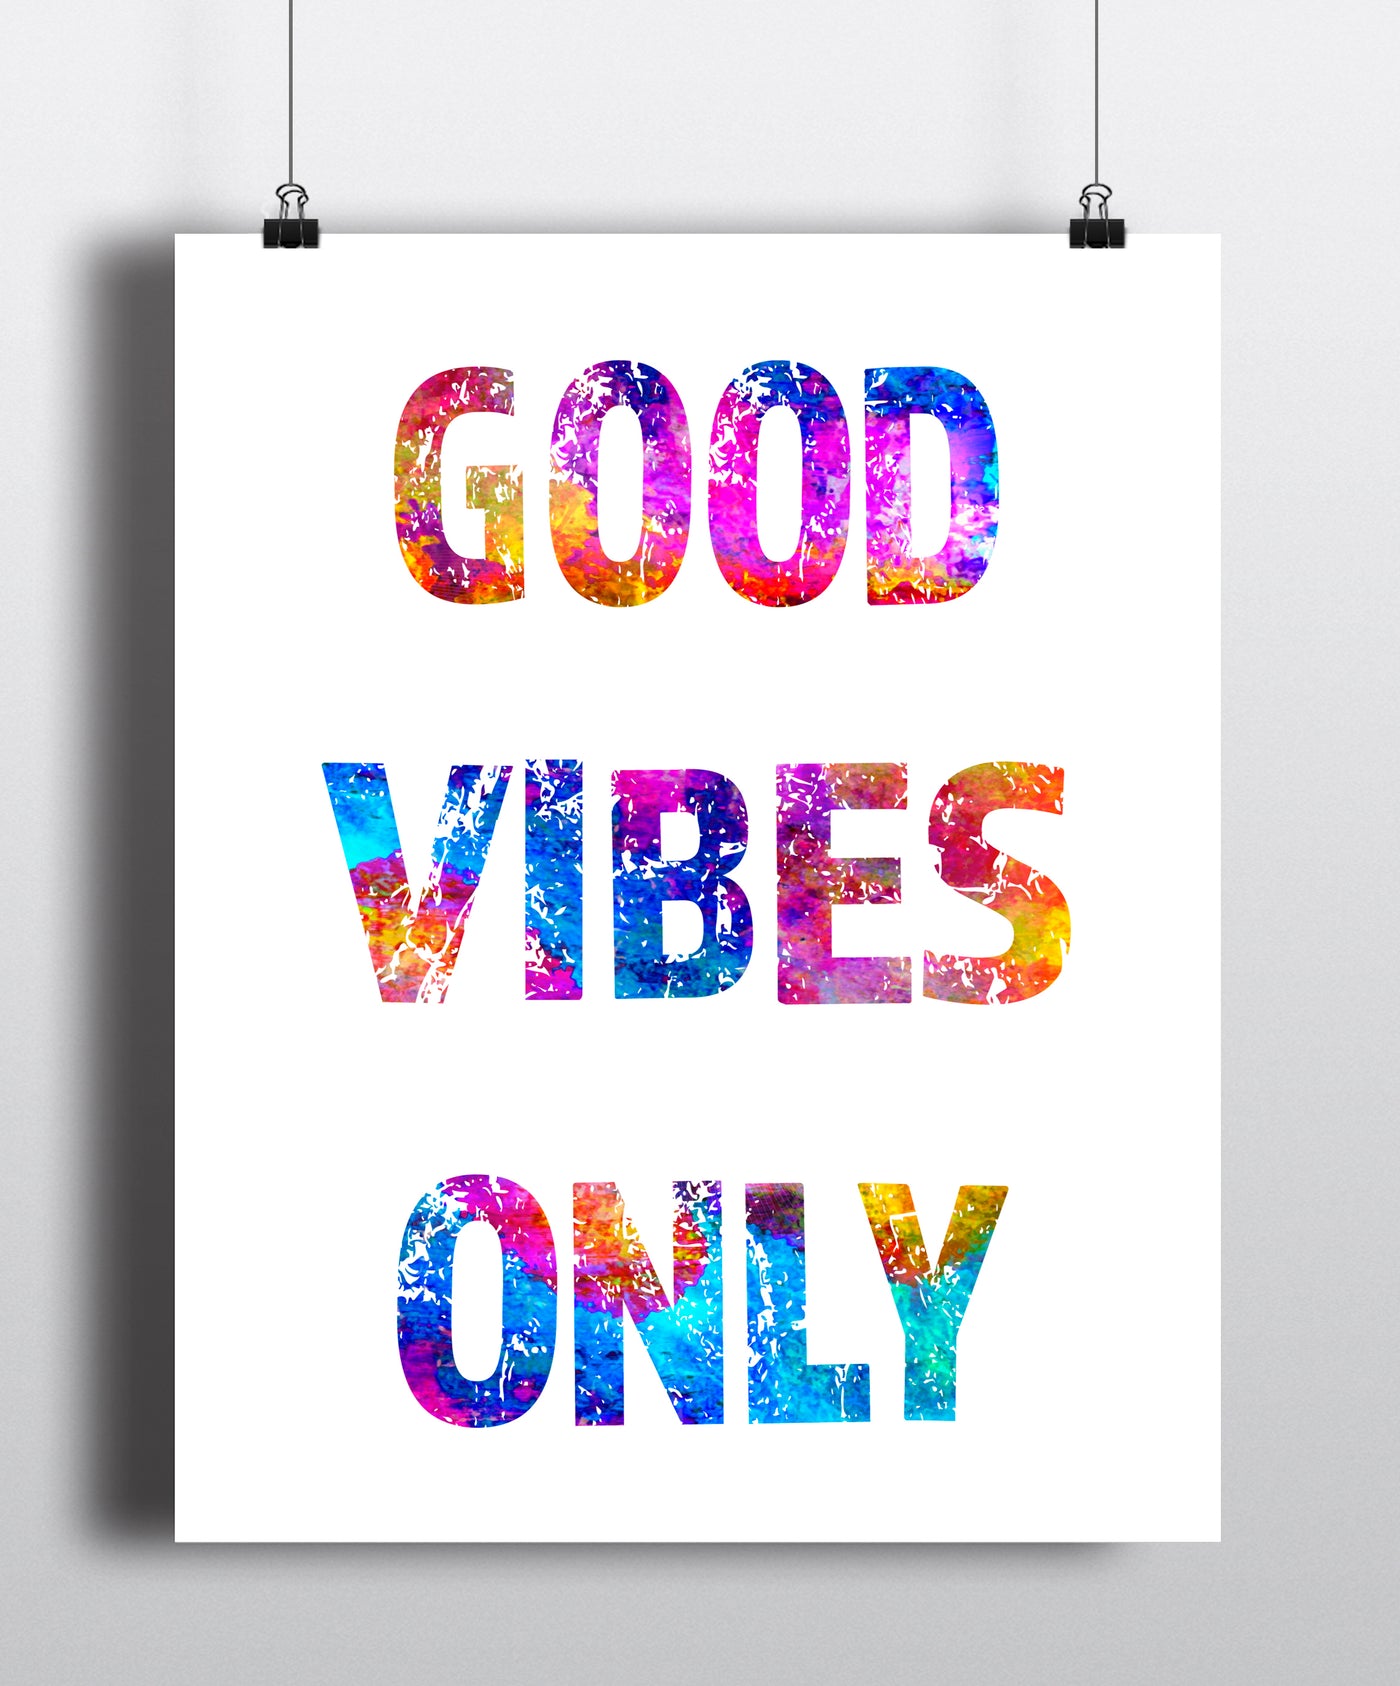 Quote Art Prints - Unframed